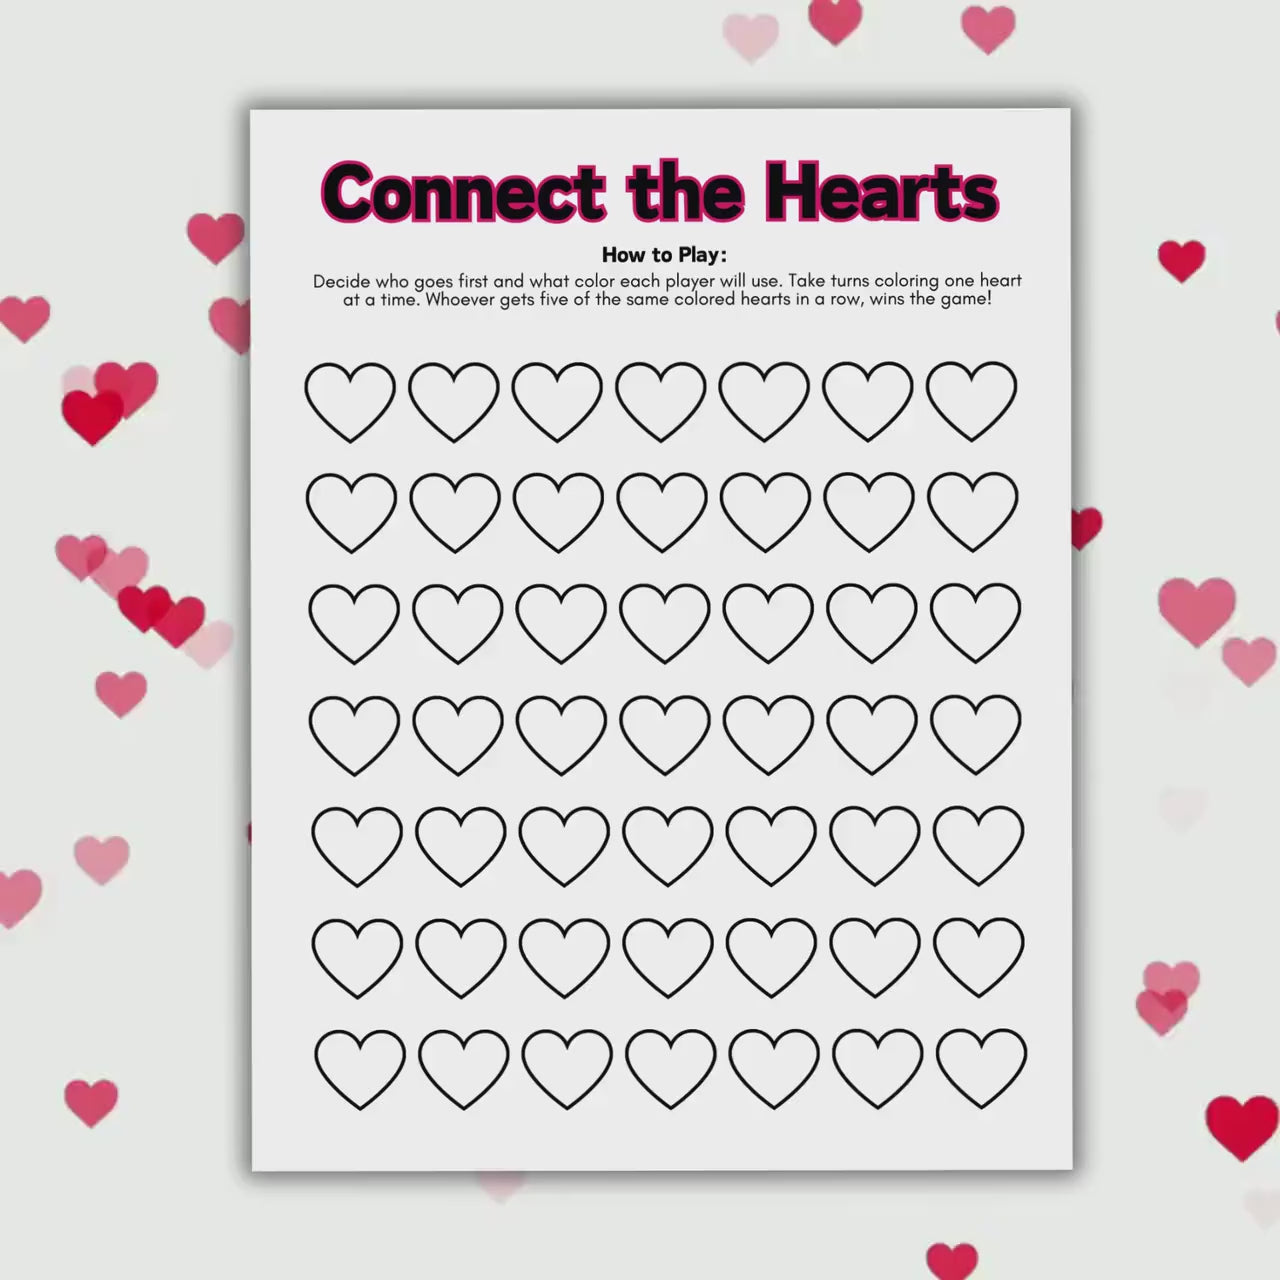 Connect the Hearts, Printable Games for Kids, Printable Activities for Kids, Printable Valentine's Day Games, Printable Hearts